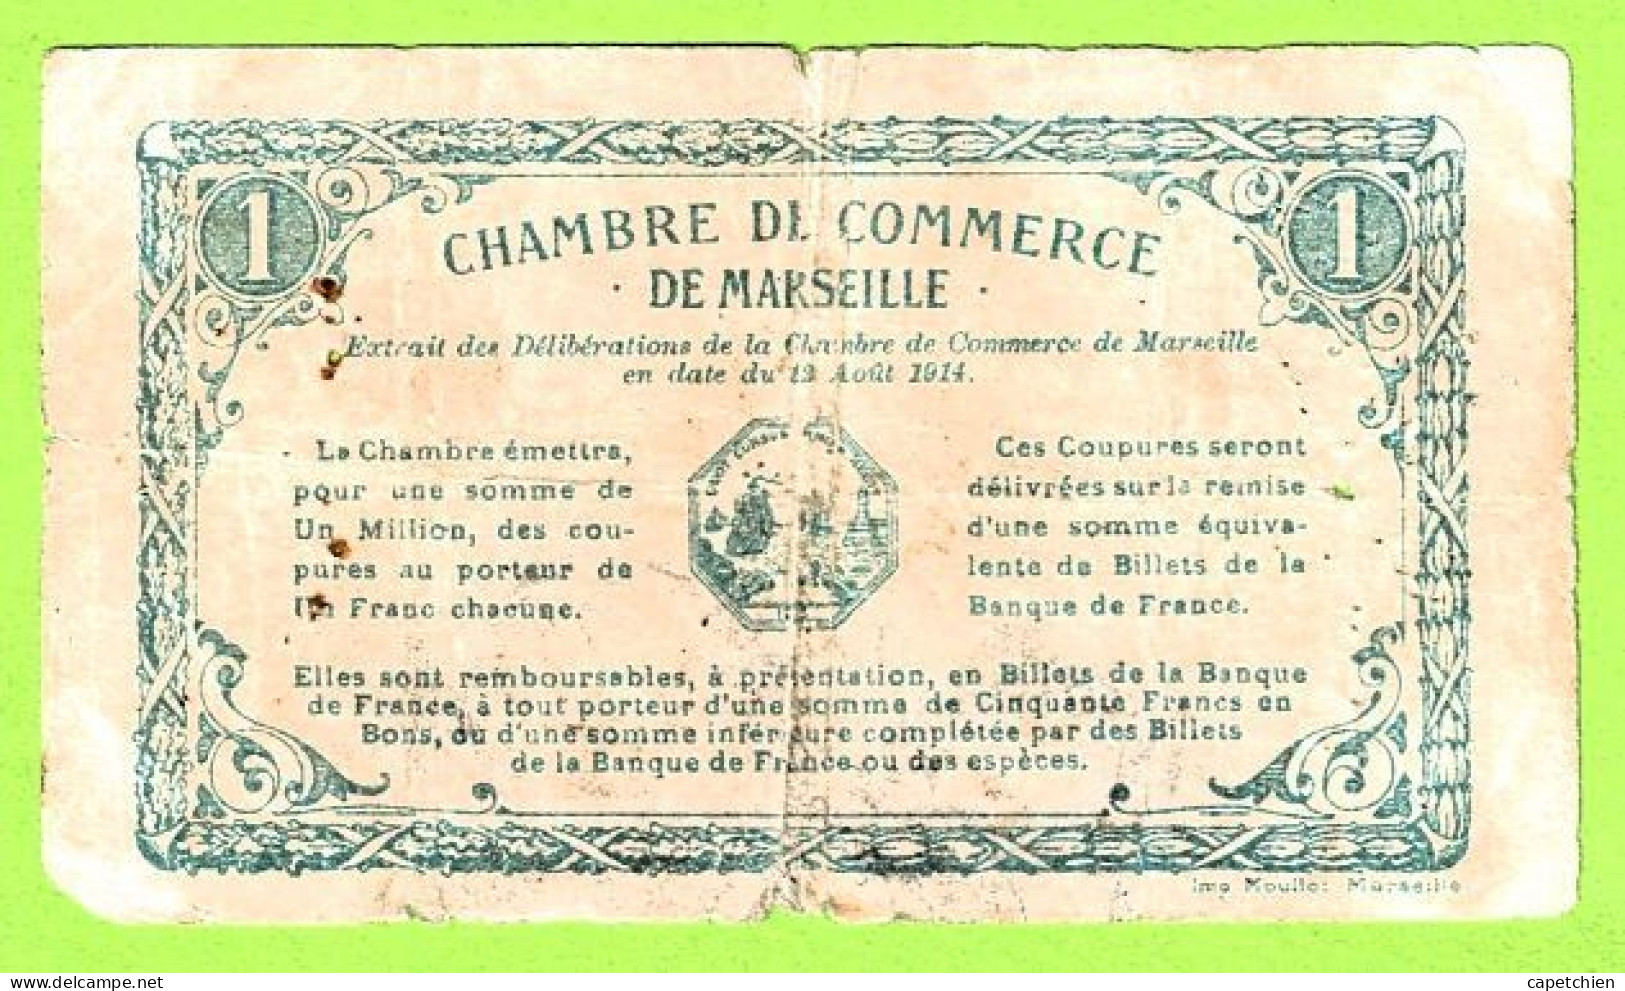 FRANCE / CHAMBRE De COMMERCE / MARSEILLE / 1 FRANC / 13 AOUT 1914 / N° 115236 / SERIE B - Chamber Of Commerce